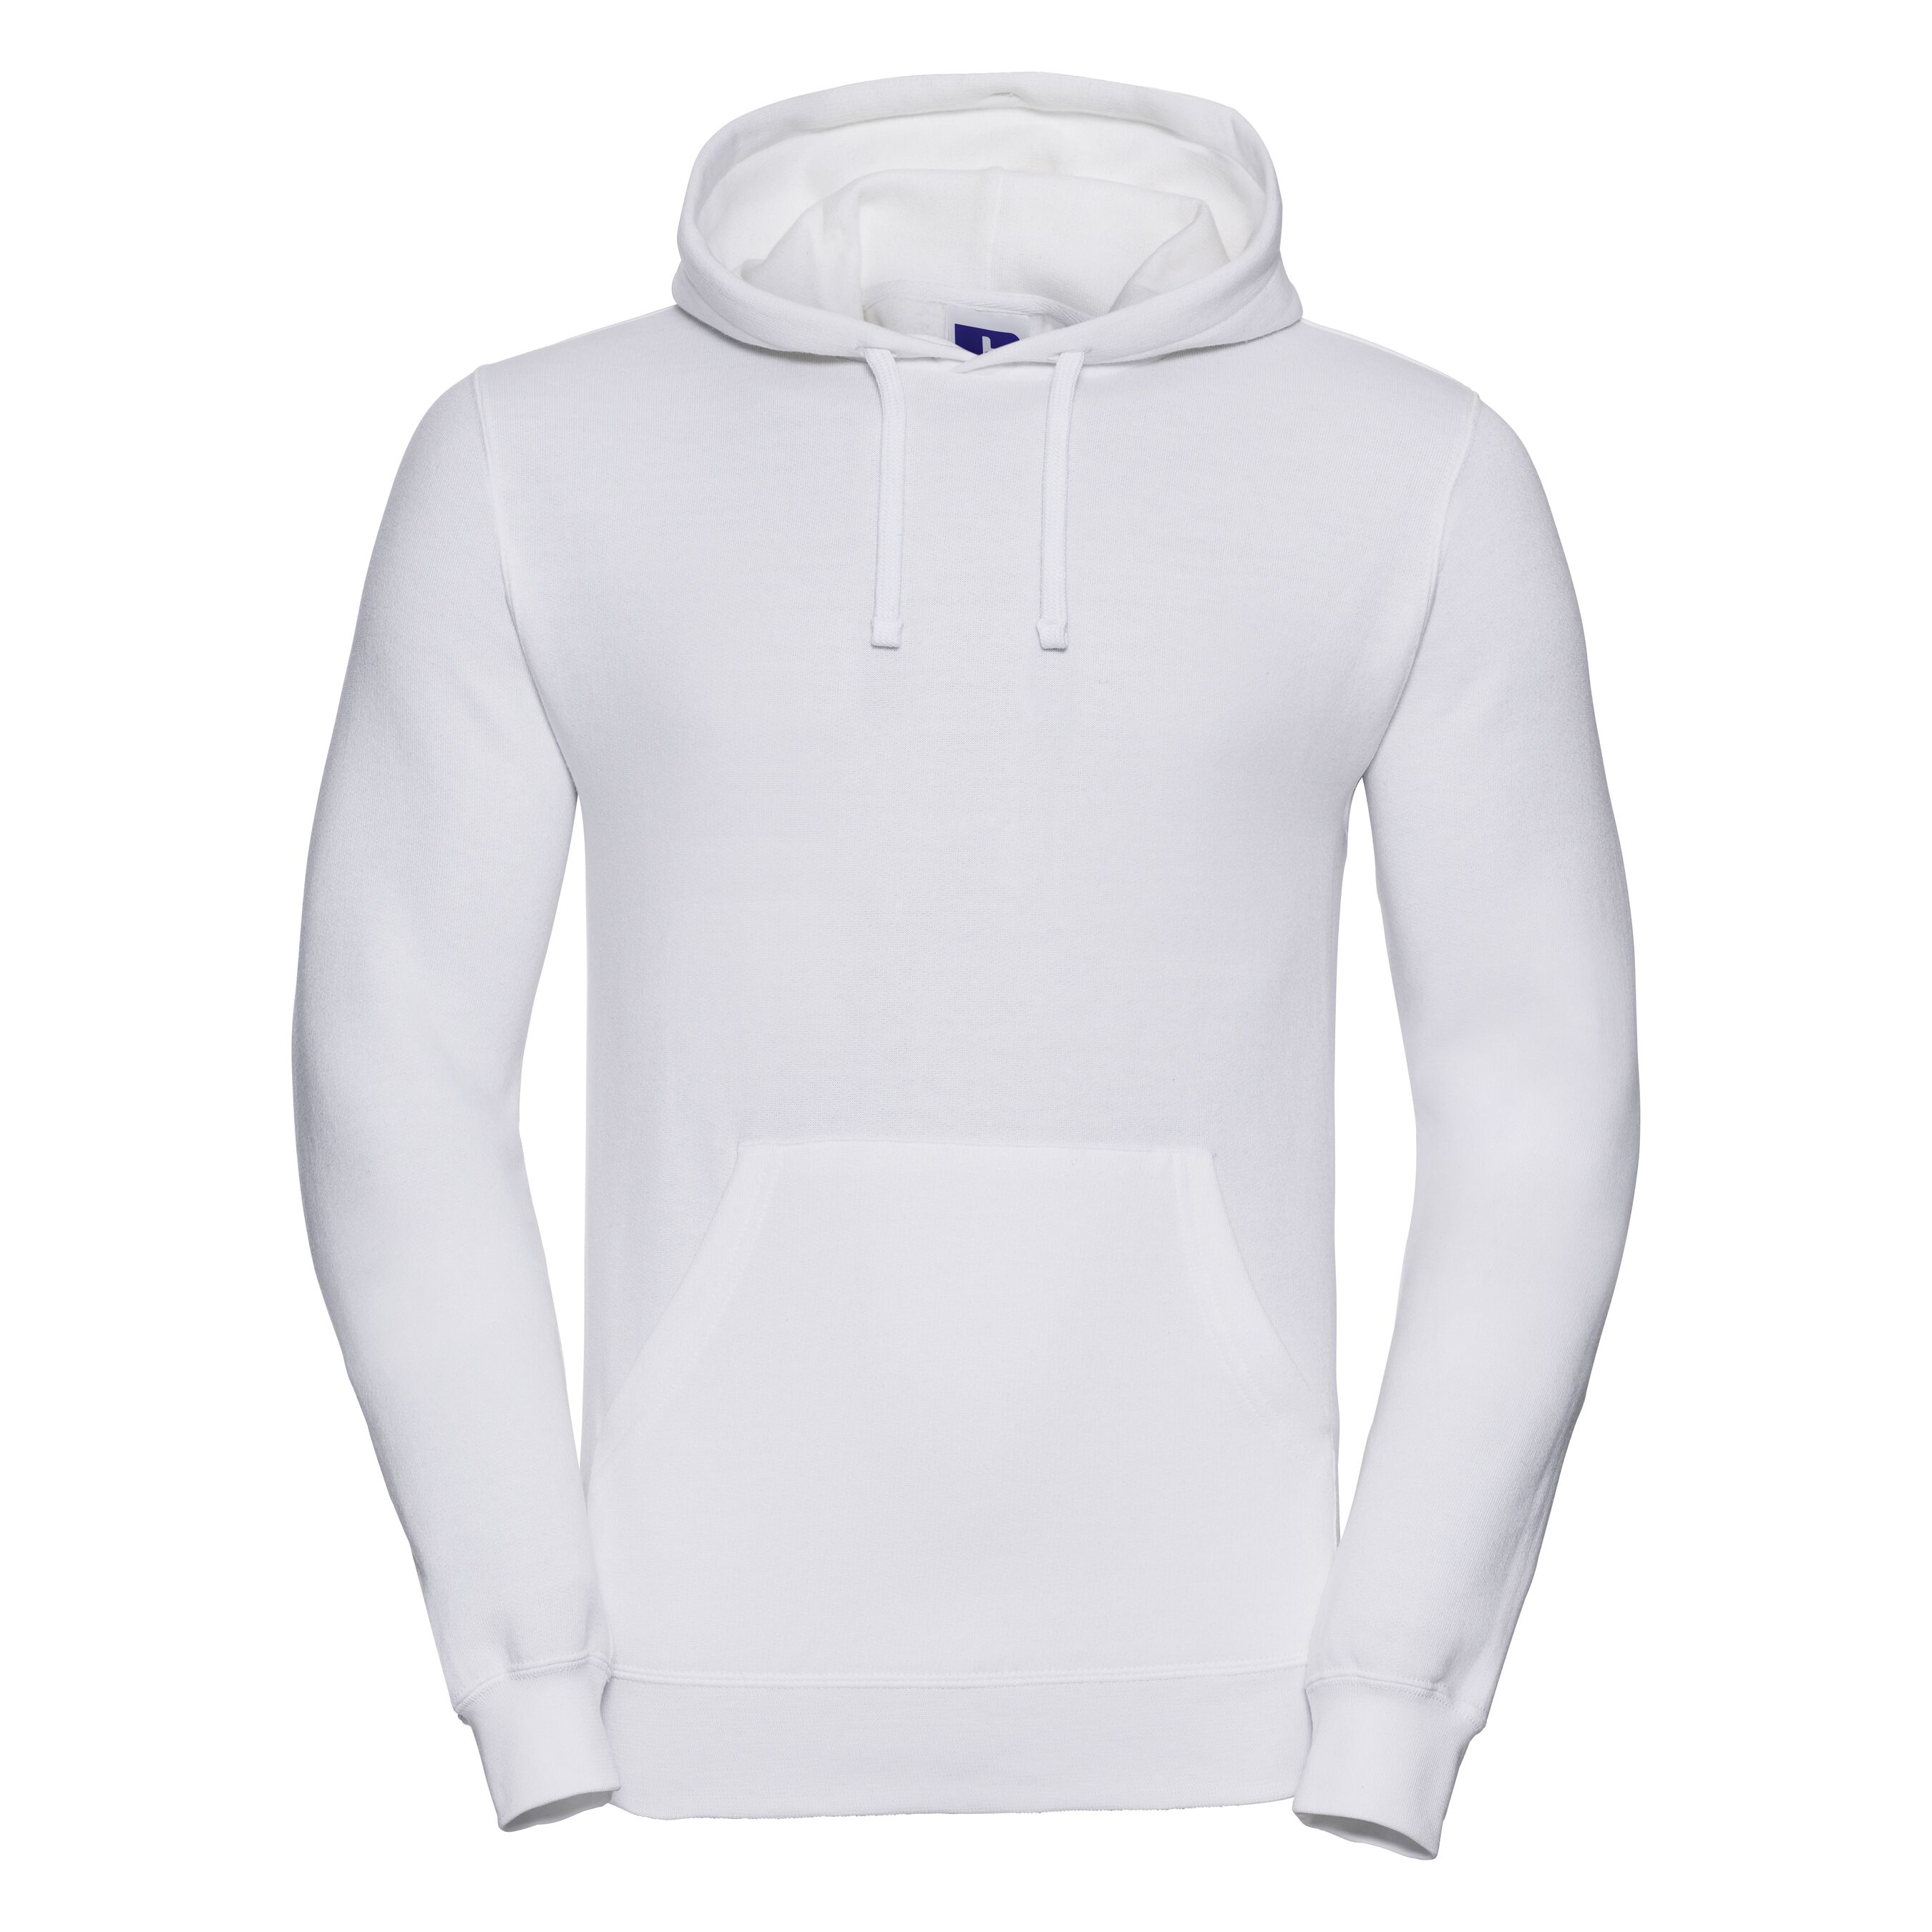 Russell Hooded Sweatshirt - Color Coded